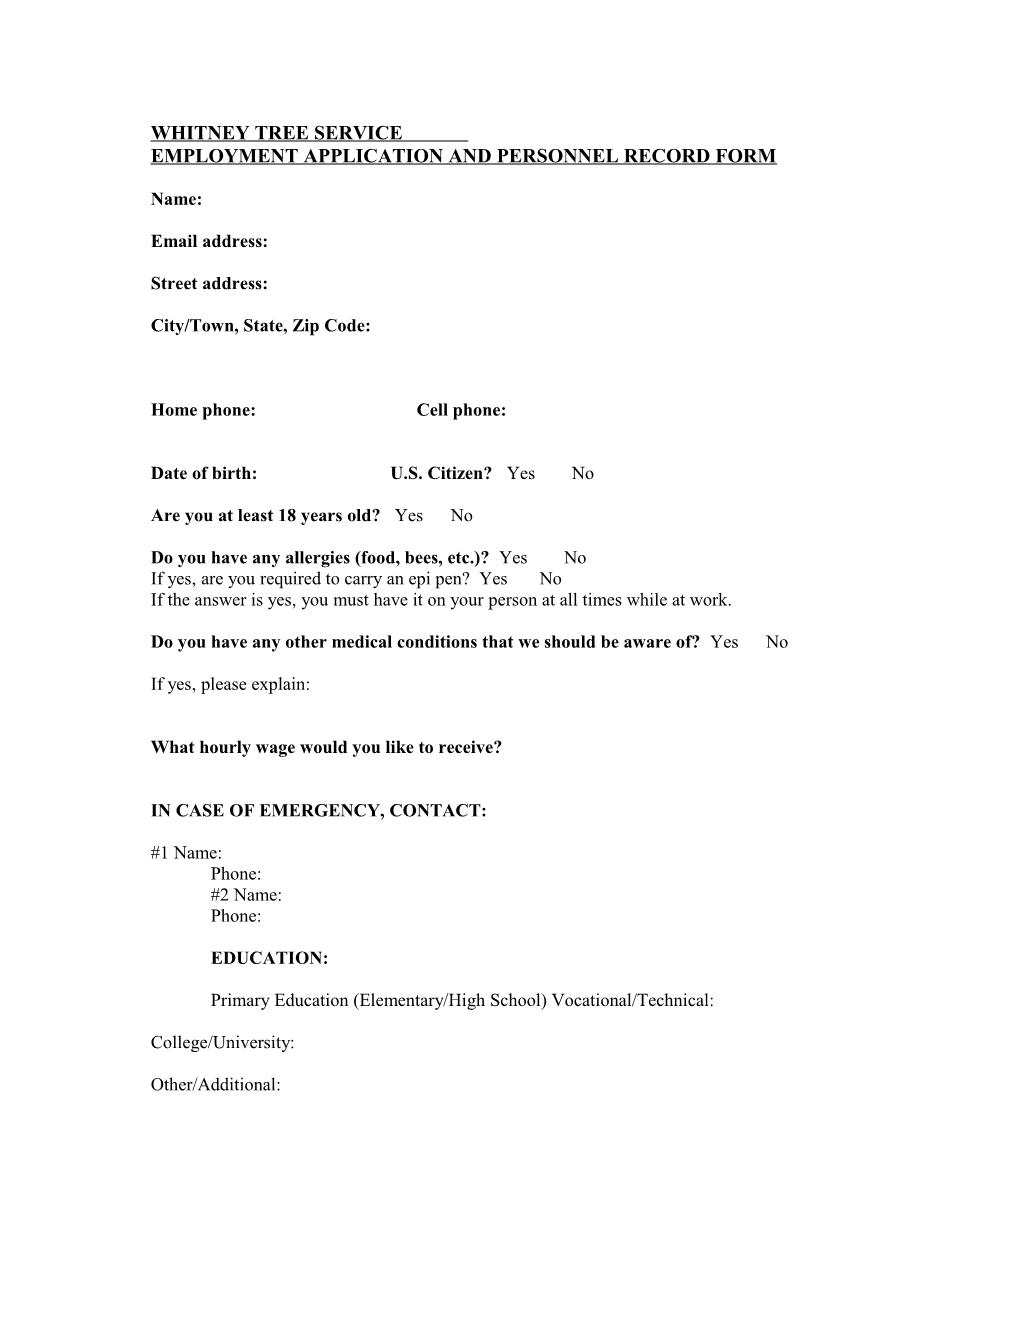 Whitney Tree Service Employment Application and Personnel Record Form